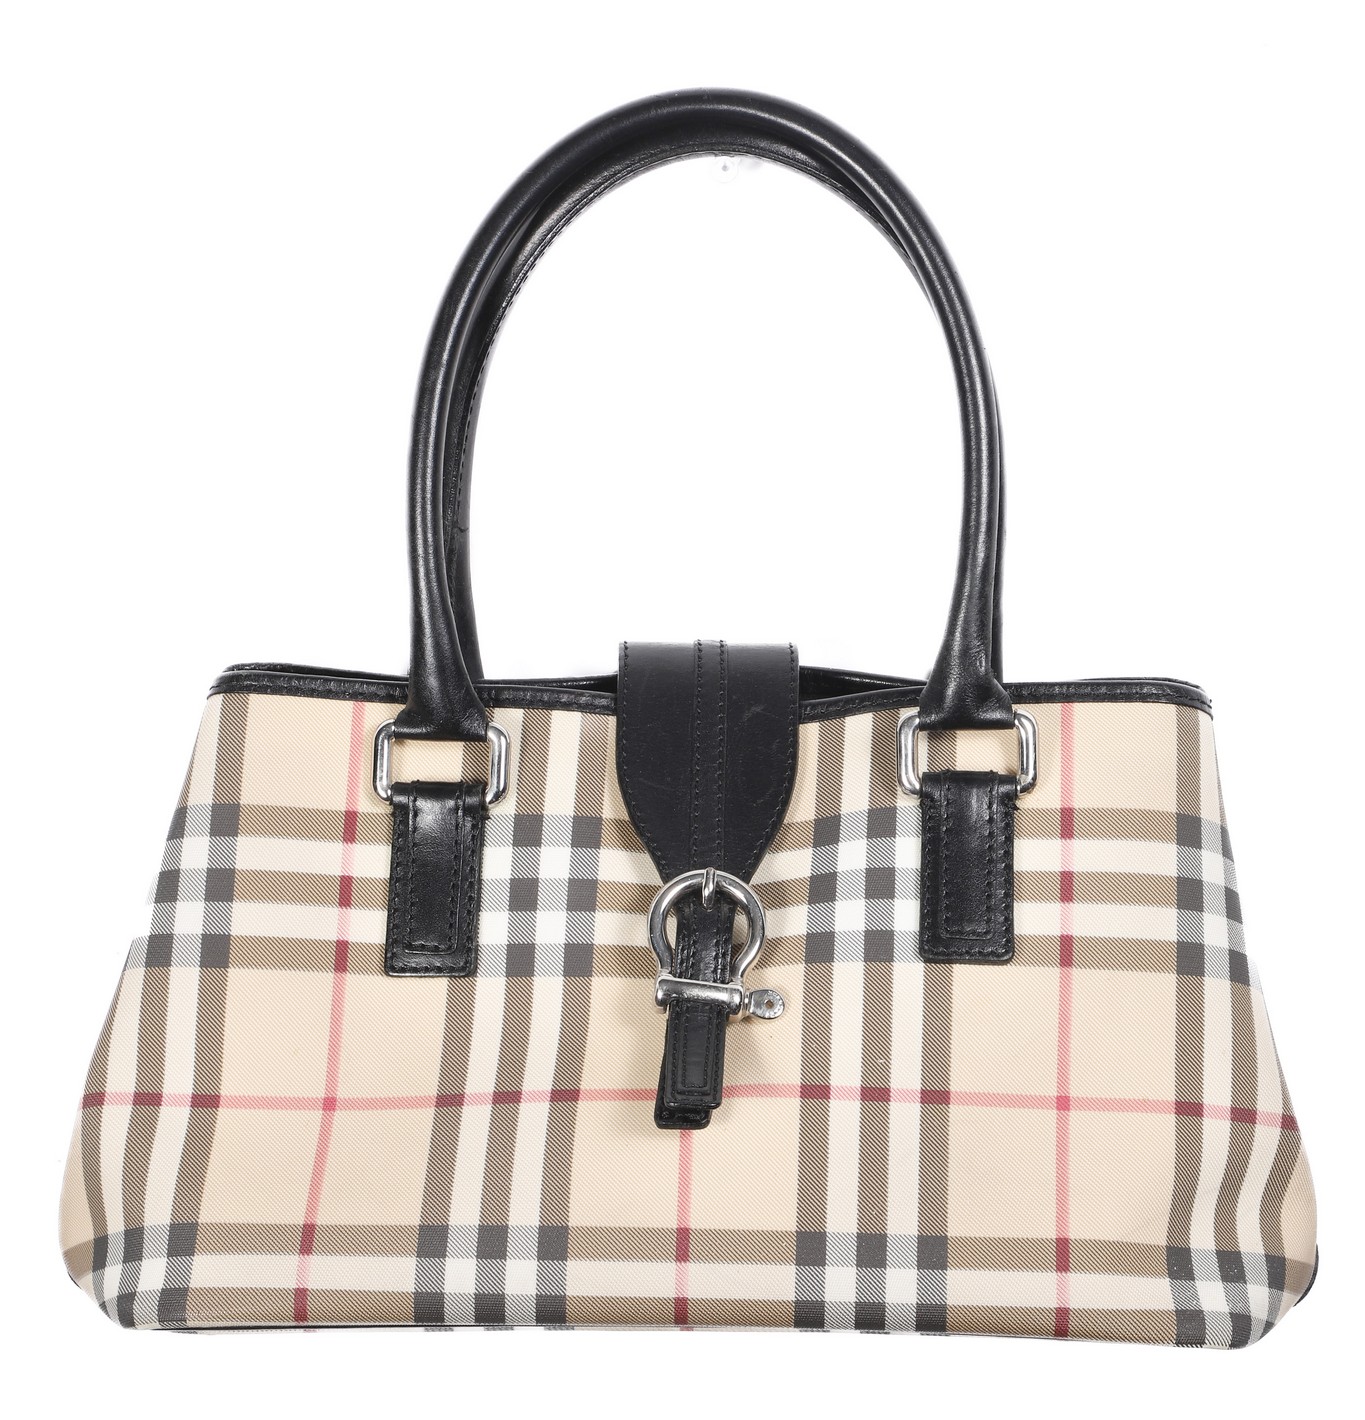 Burberry plaid canvas and leather purse,